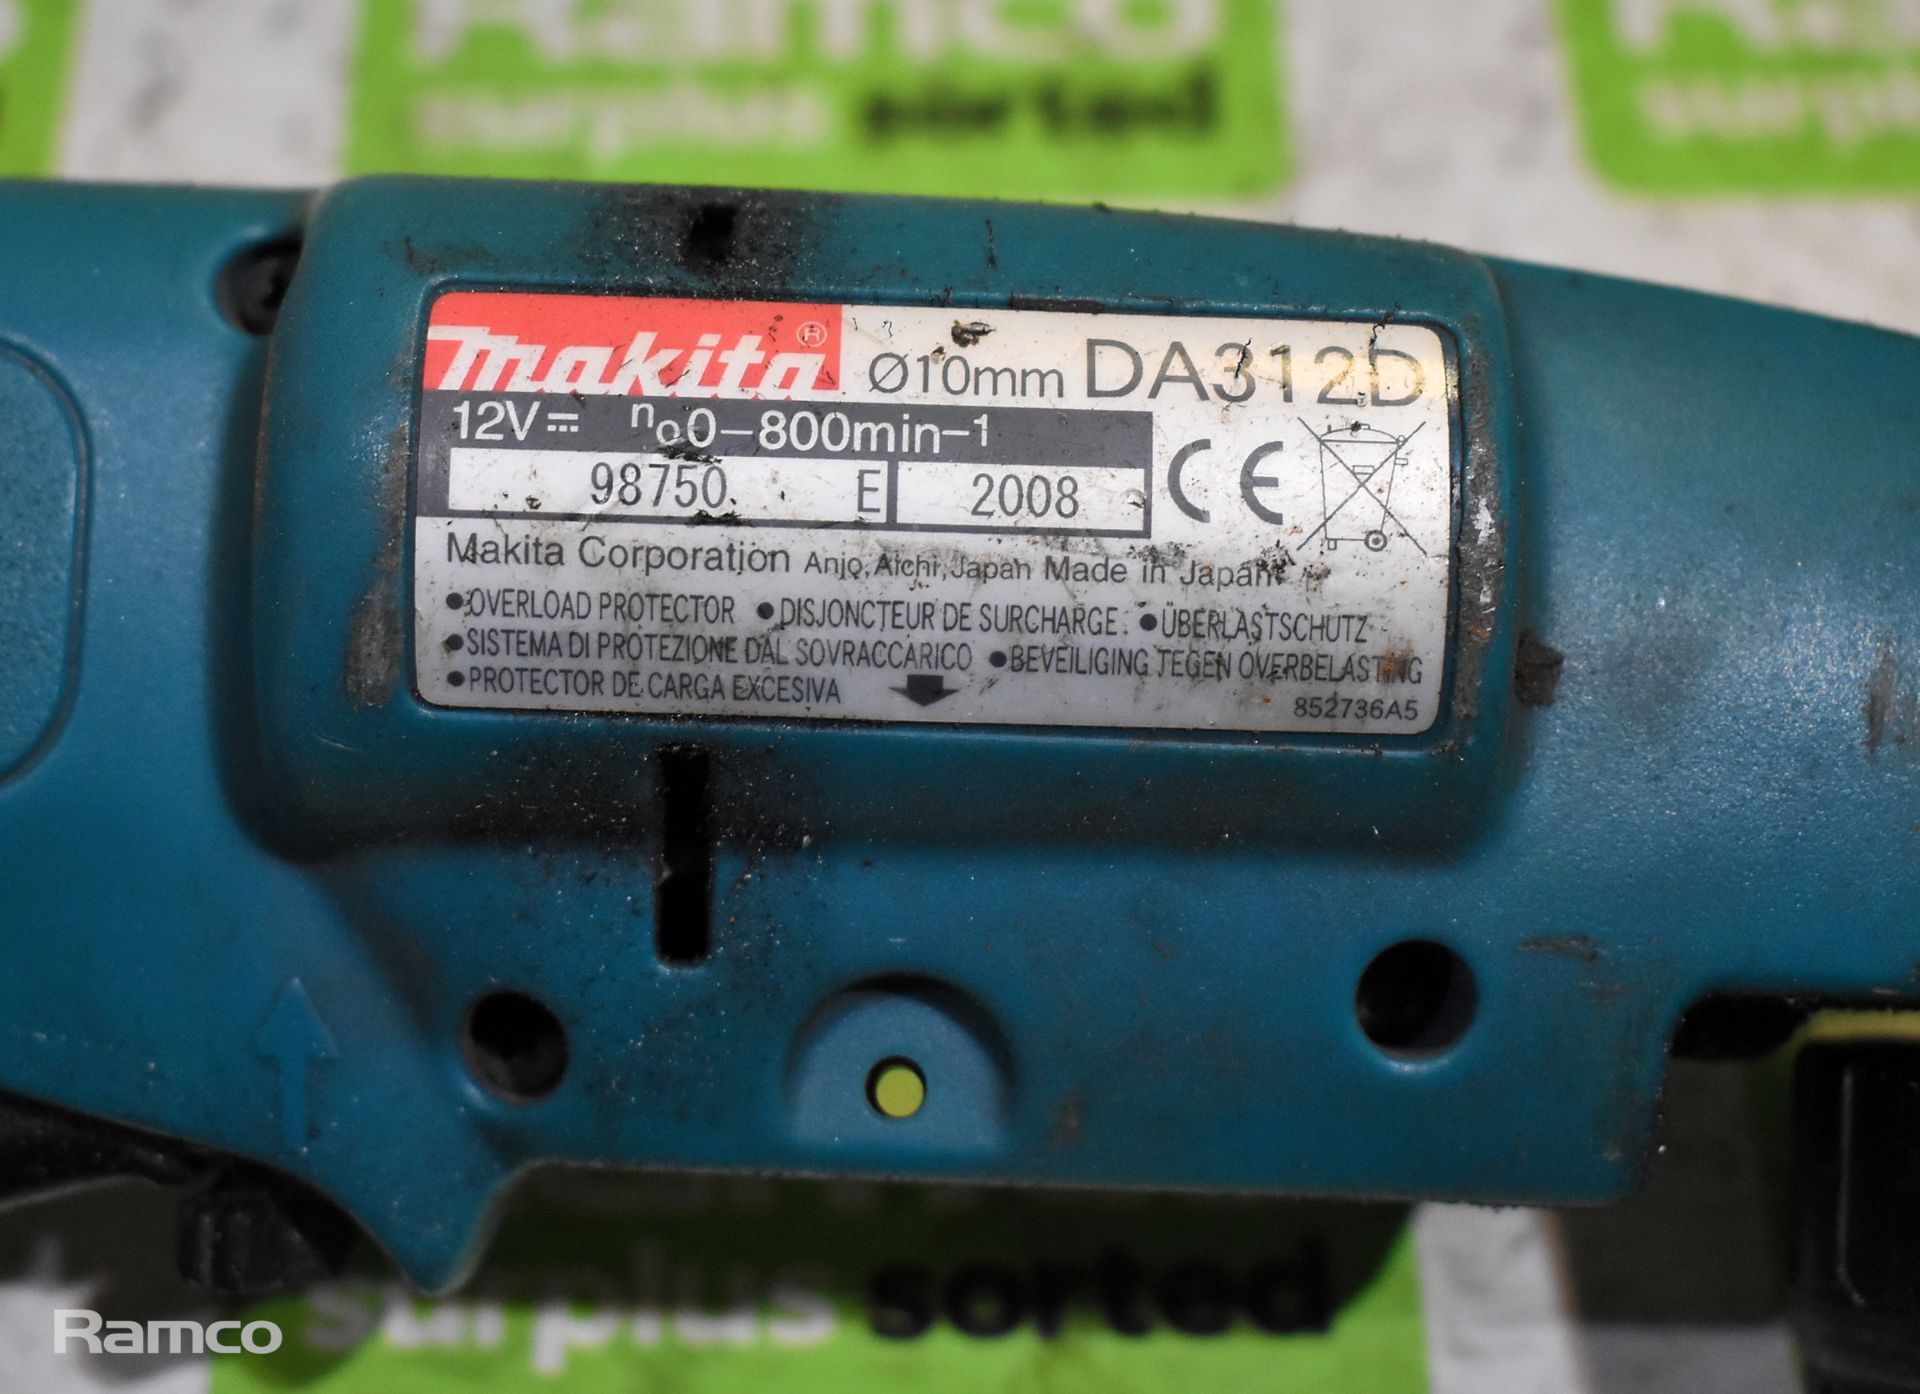 2x Makita DA312D cordless angle drill with charger, battery and case - Image 4 of 9